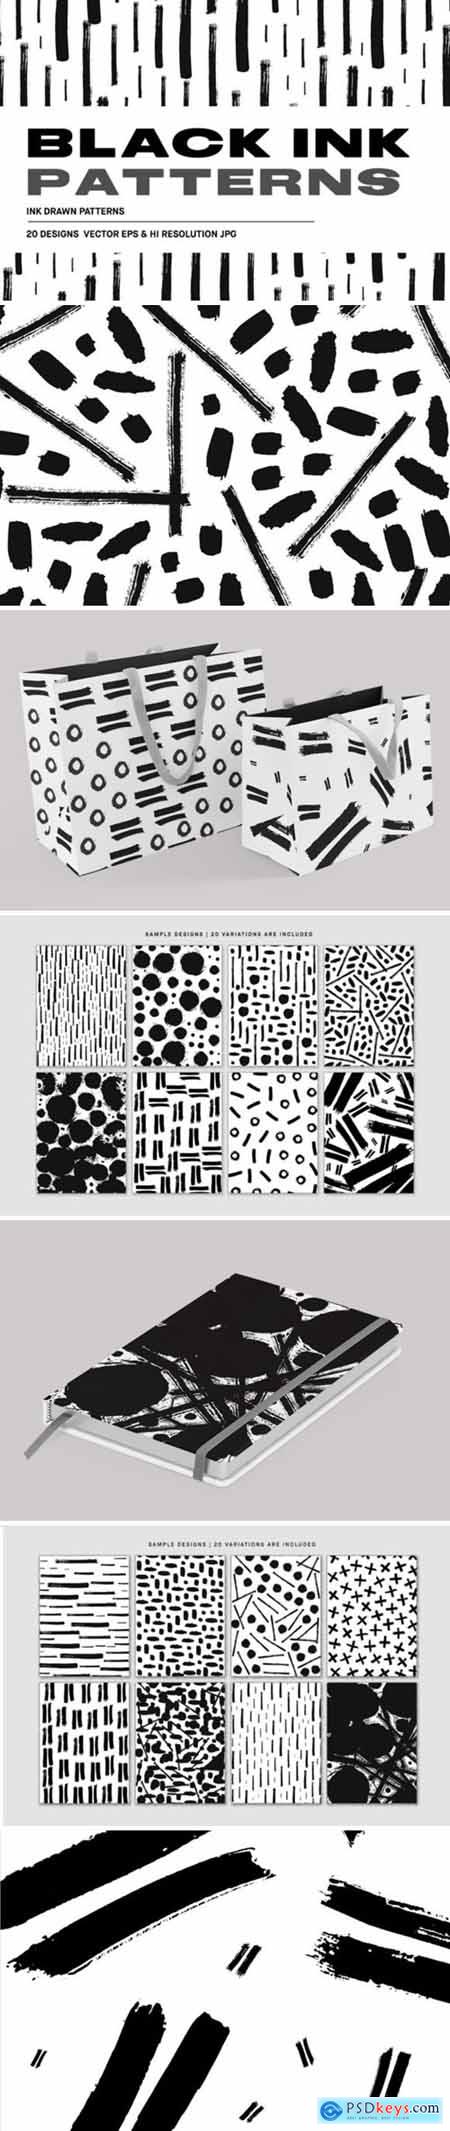 Black Ink - Abstract Paint Backgrounds 3955158